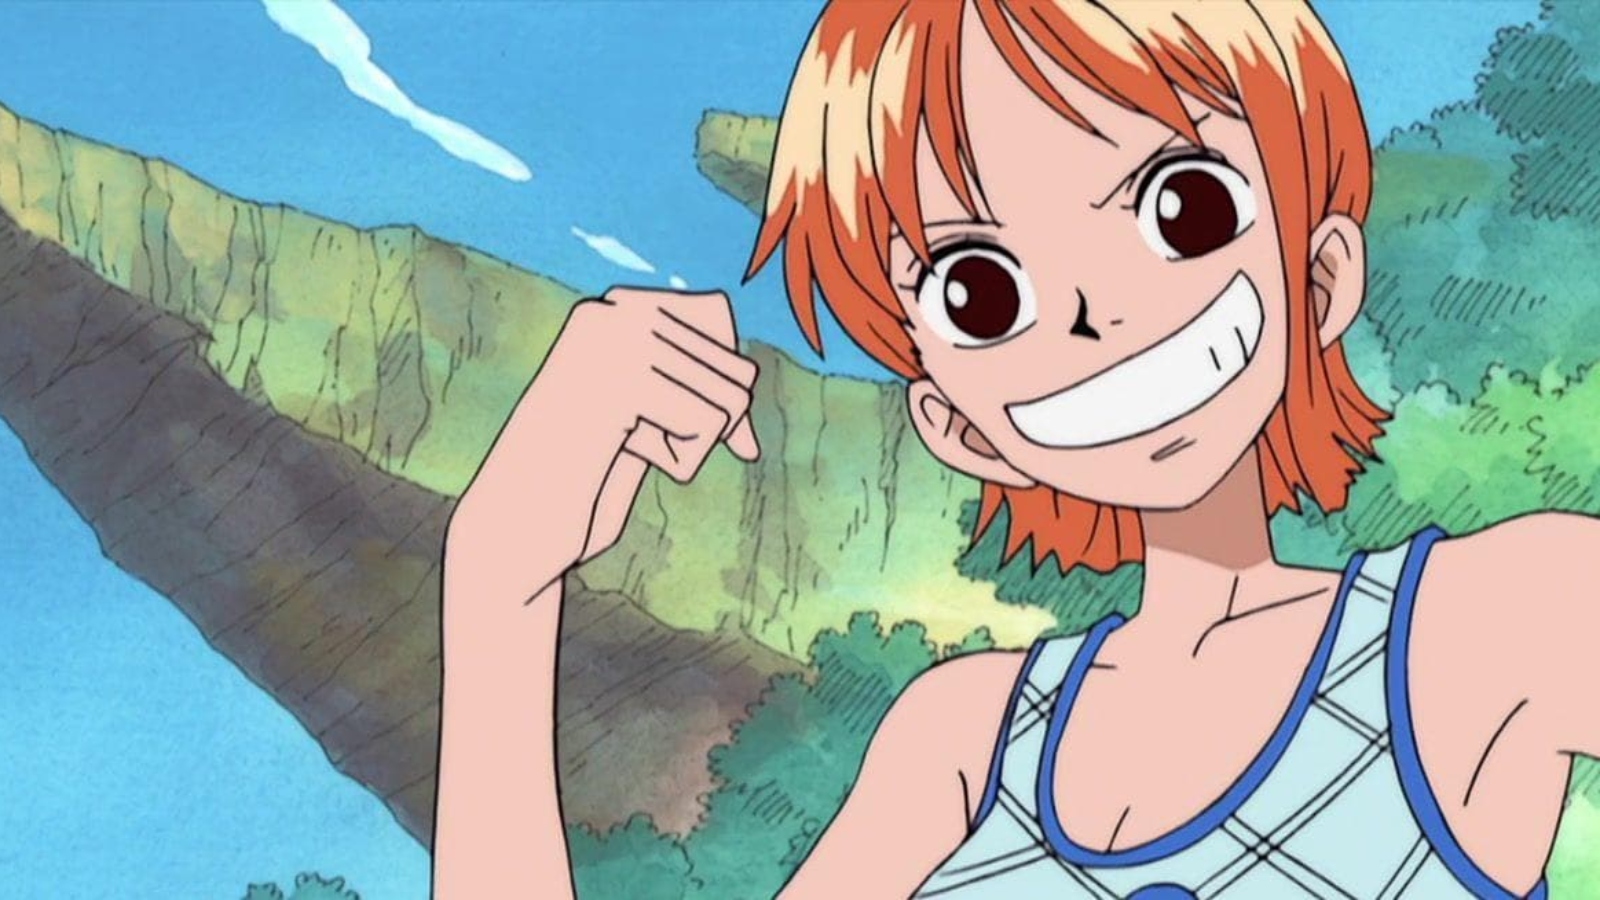 Nami from One Piece holding up her fist